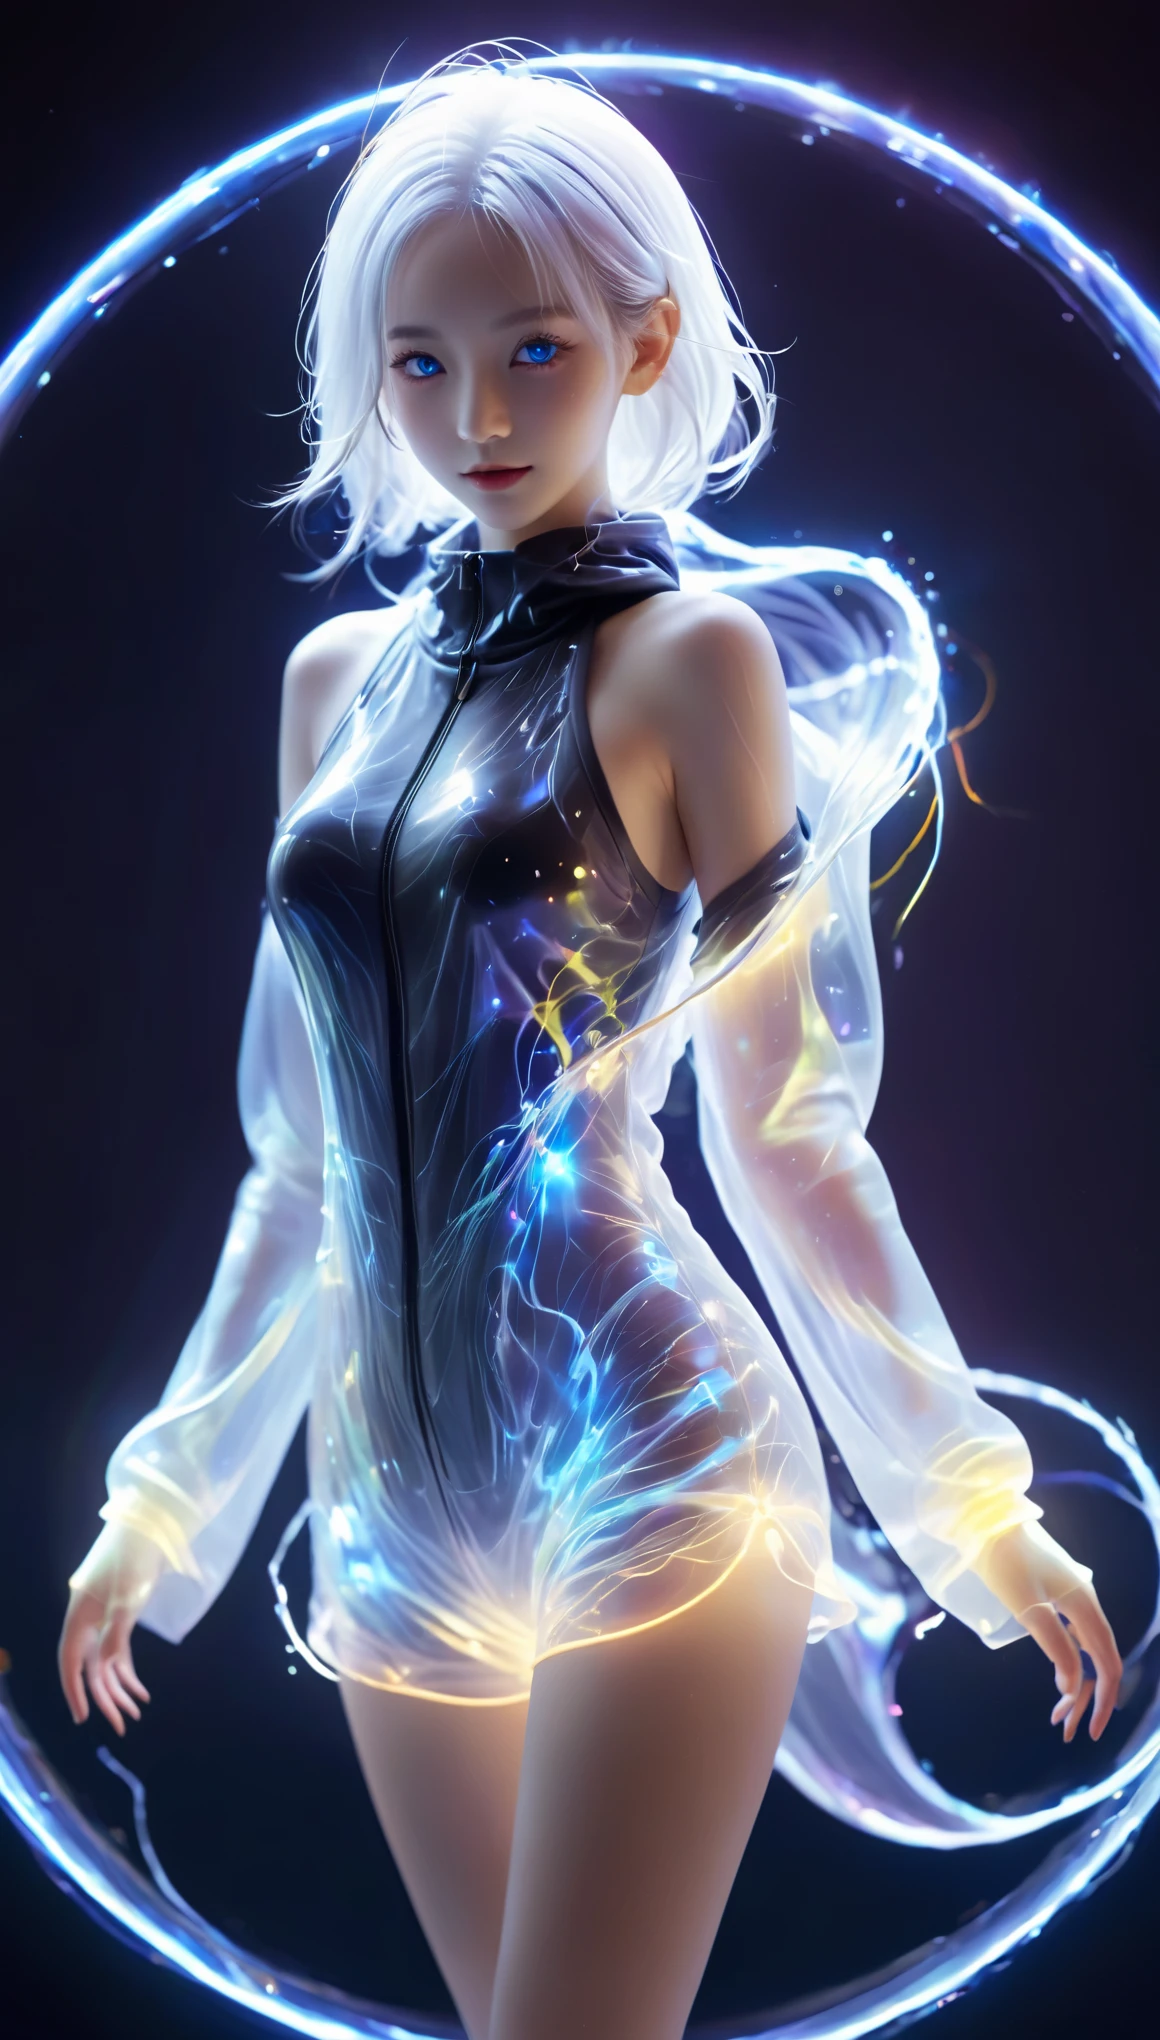 bail_particle,bail_line,lineแสง,particleของแสง,A girl made of particle,white hair,Halter_set,1 girl,bail_Light element,Translucent luminous body,A girl made from light,
((dark)),epic,8k,Fantasy,very detailed,magic,((range hood)),(range hoodie),((((hair on one eye)))),Cast a spell.,Black hole,fish,((glow eyes)) ((blue eyes)),((glow)),((in full bloom)),beautiful,Masterpiece,nonsense,best quality,stand,1 girl,human,evil,evil grin,apocalypse,destruction,end of the world,crazy eyes,Crazy,mental disorder,looking down,predominate,(sadism),((Demoniac)),spear,spectrum,scary,circle,edge,edge light,crescent,abyssal,shorts,Groin,hip bone,hip line cowboy shot,magic Circle,too much energy,sci-fi,abyssaltech,พลังงานdark,impersonal,dissolve,see through,abyss,antitech,sci-fi,pure energy,thigh,